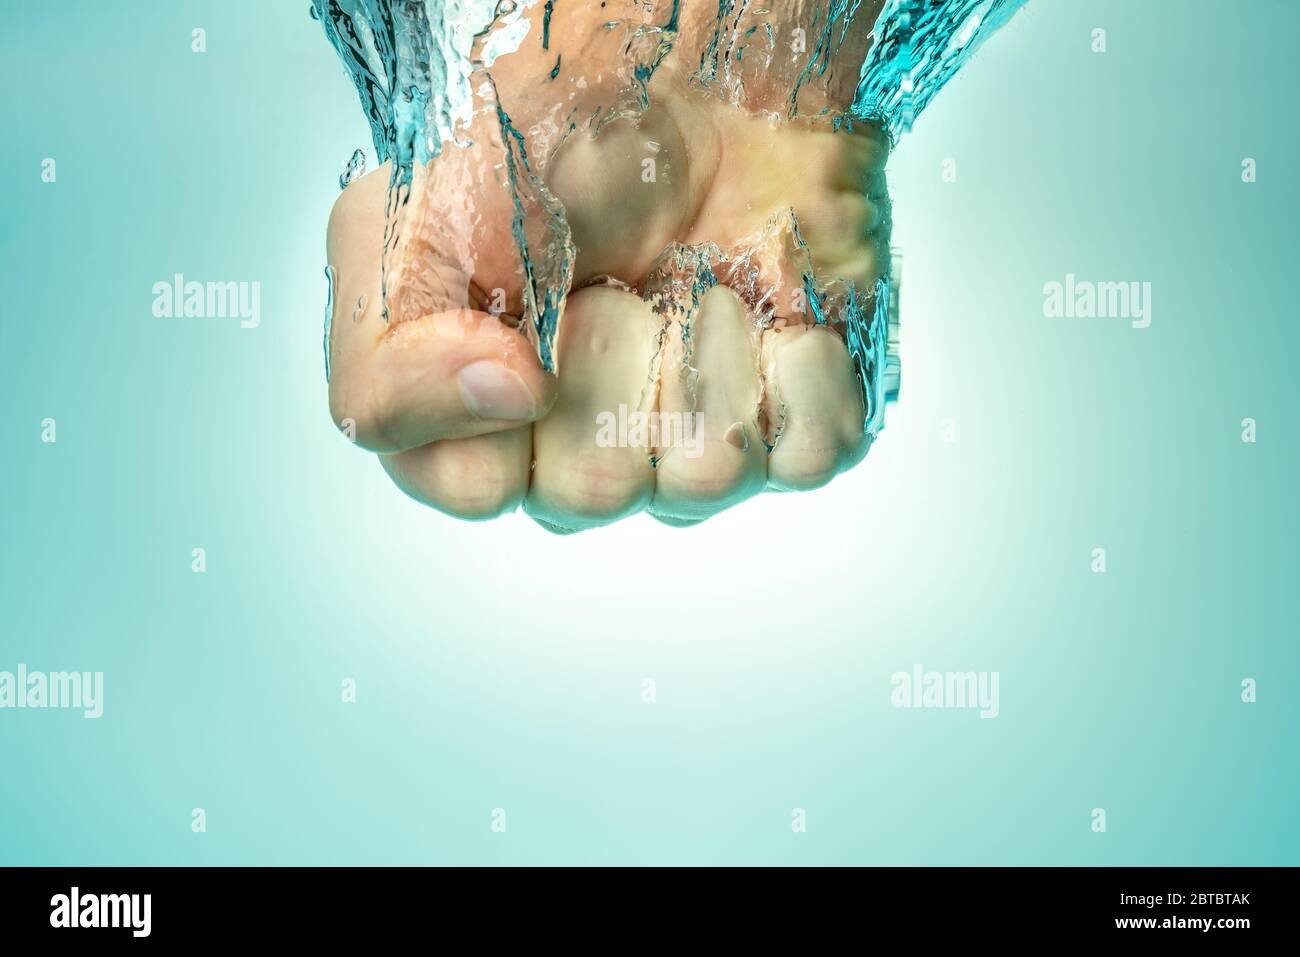 Man hit the water from above. The power of strength and self-confidence. Blue background. Stock Photo